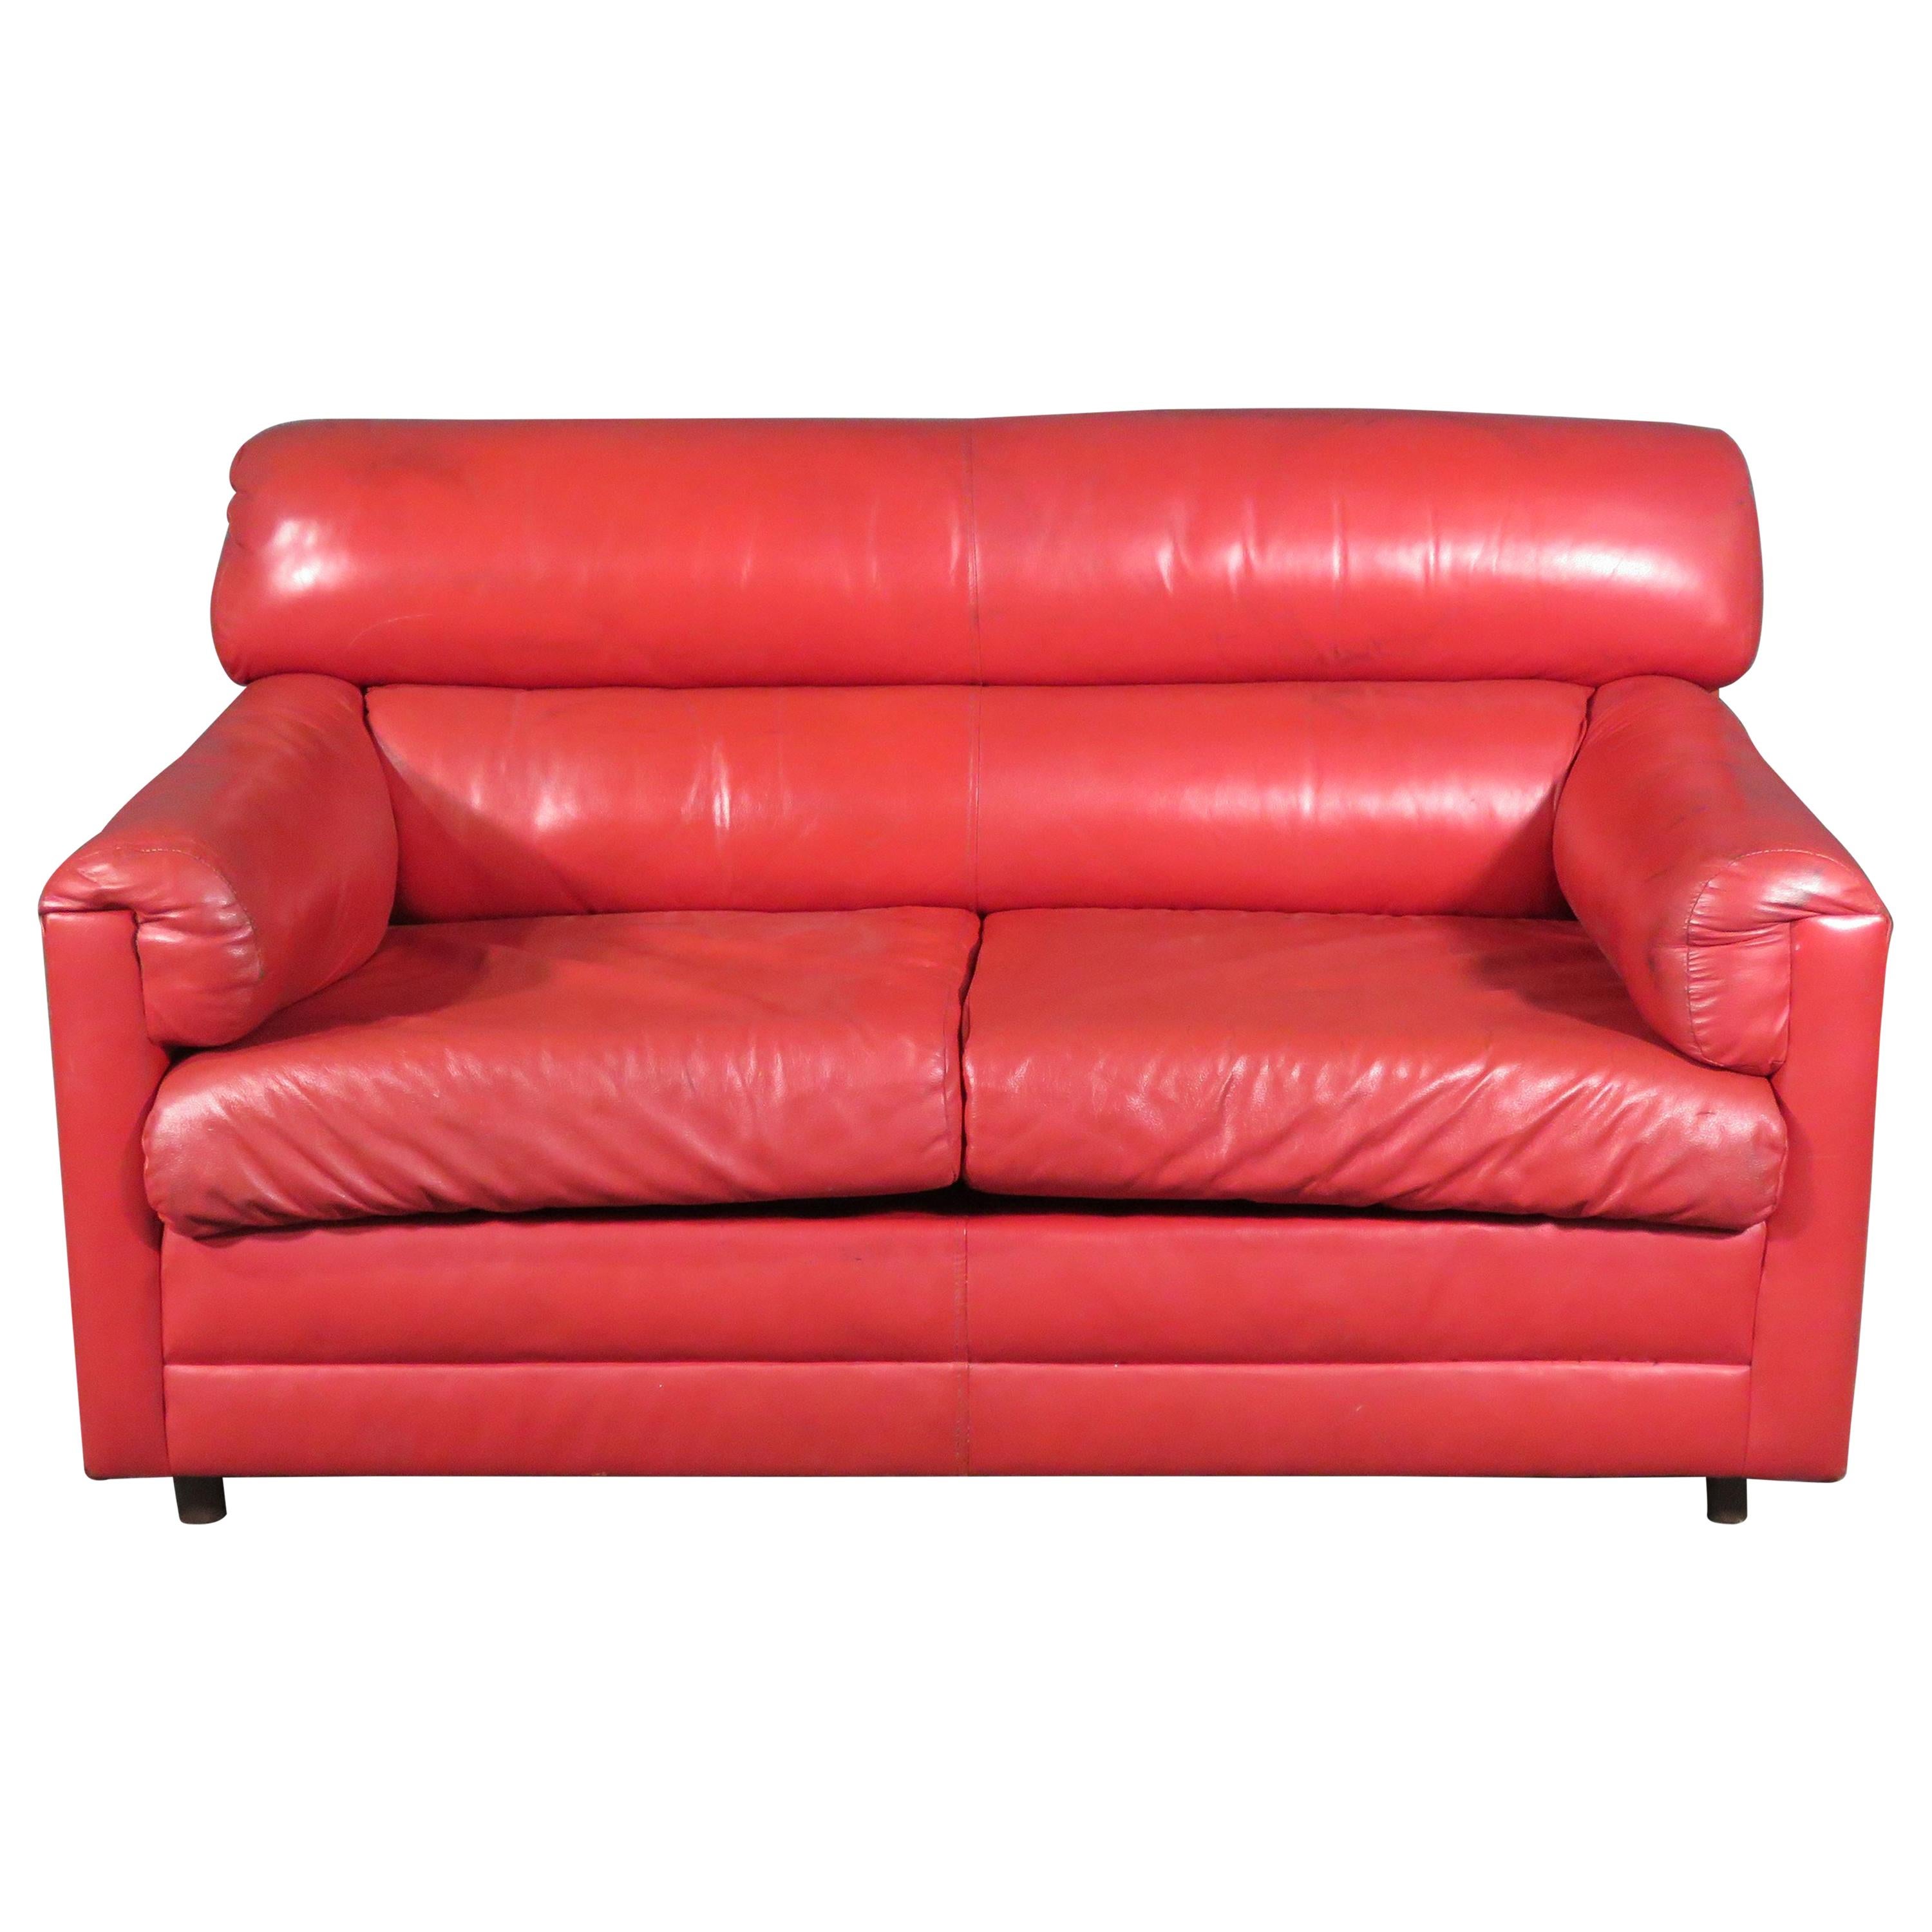 Vintage Red Leather Loveseat